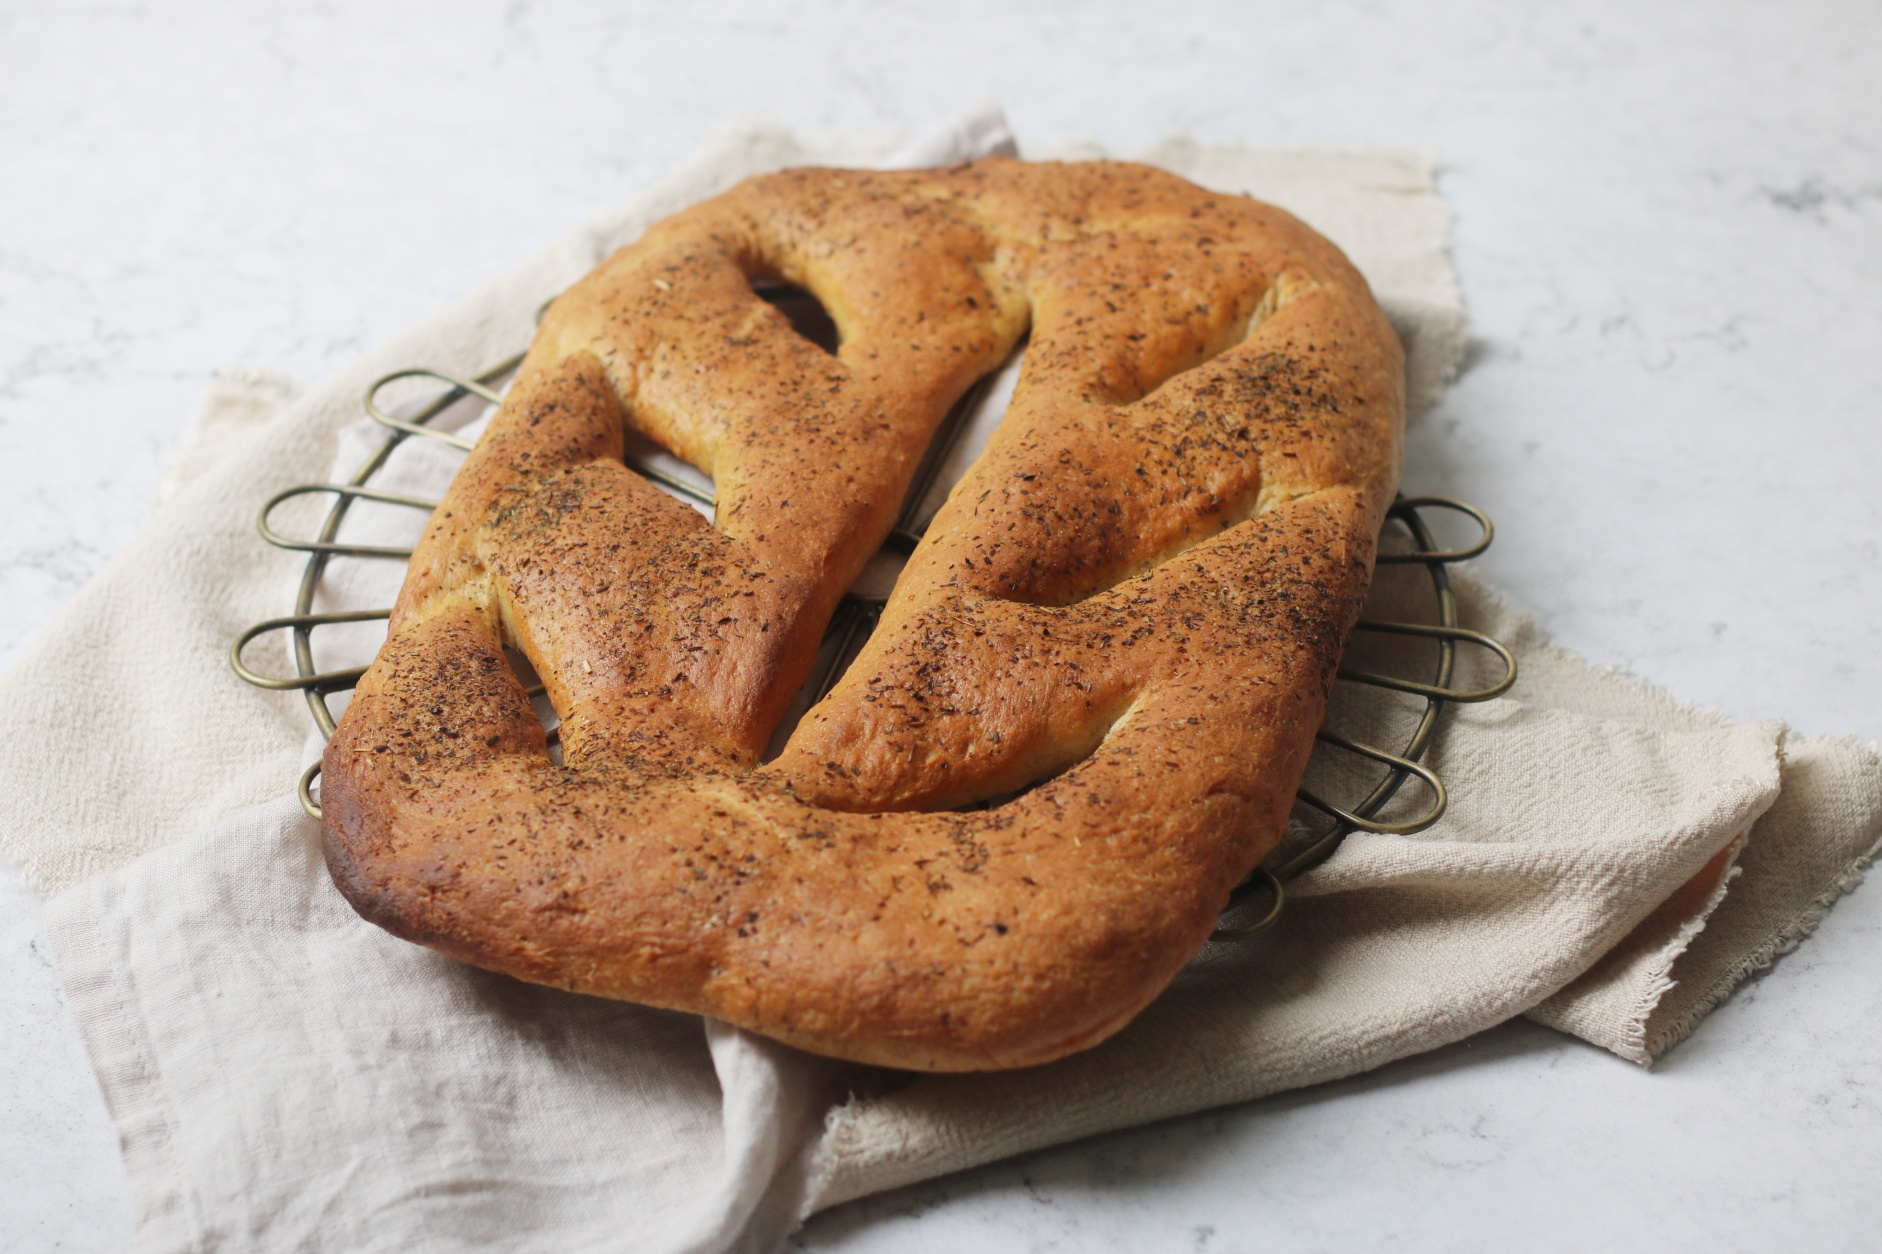 Herby fougasse